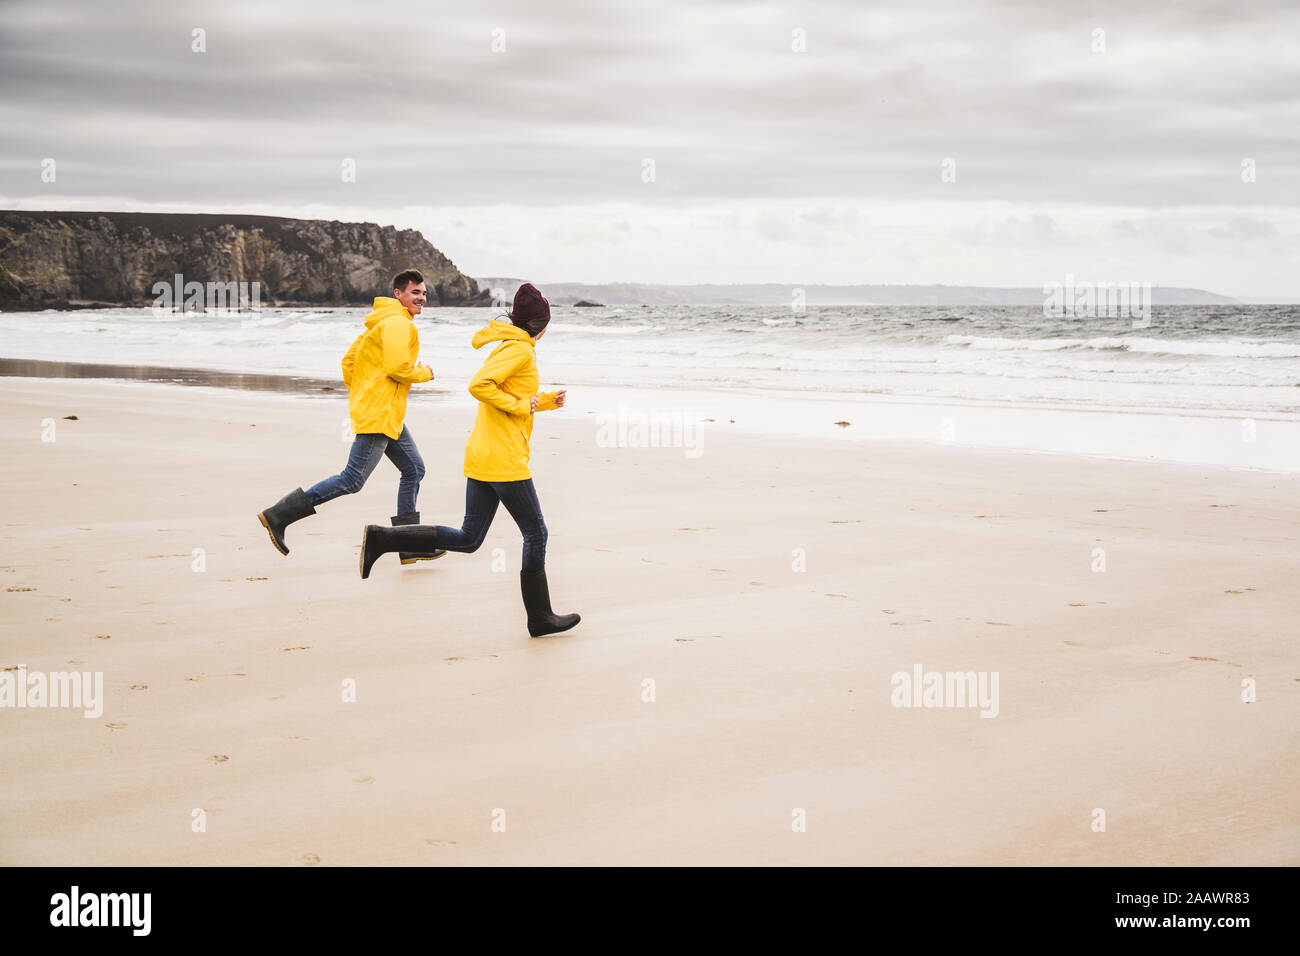 Young woman wearing yellow rain jackets and running at the beach, Bretagne, France Stock Photo